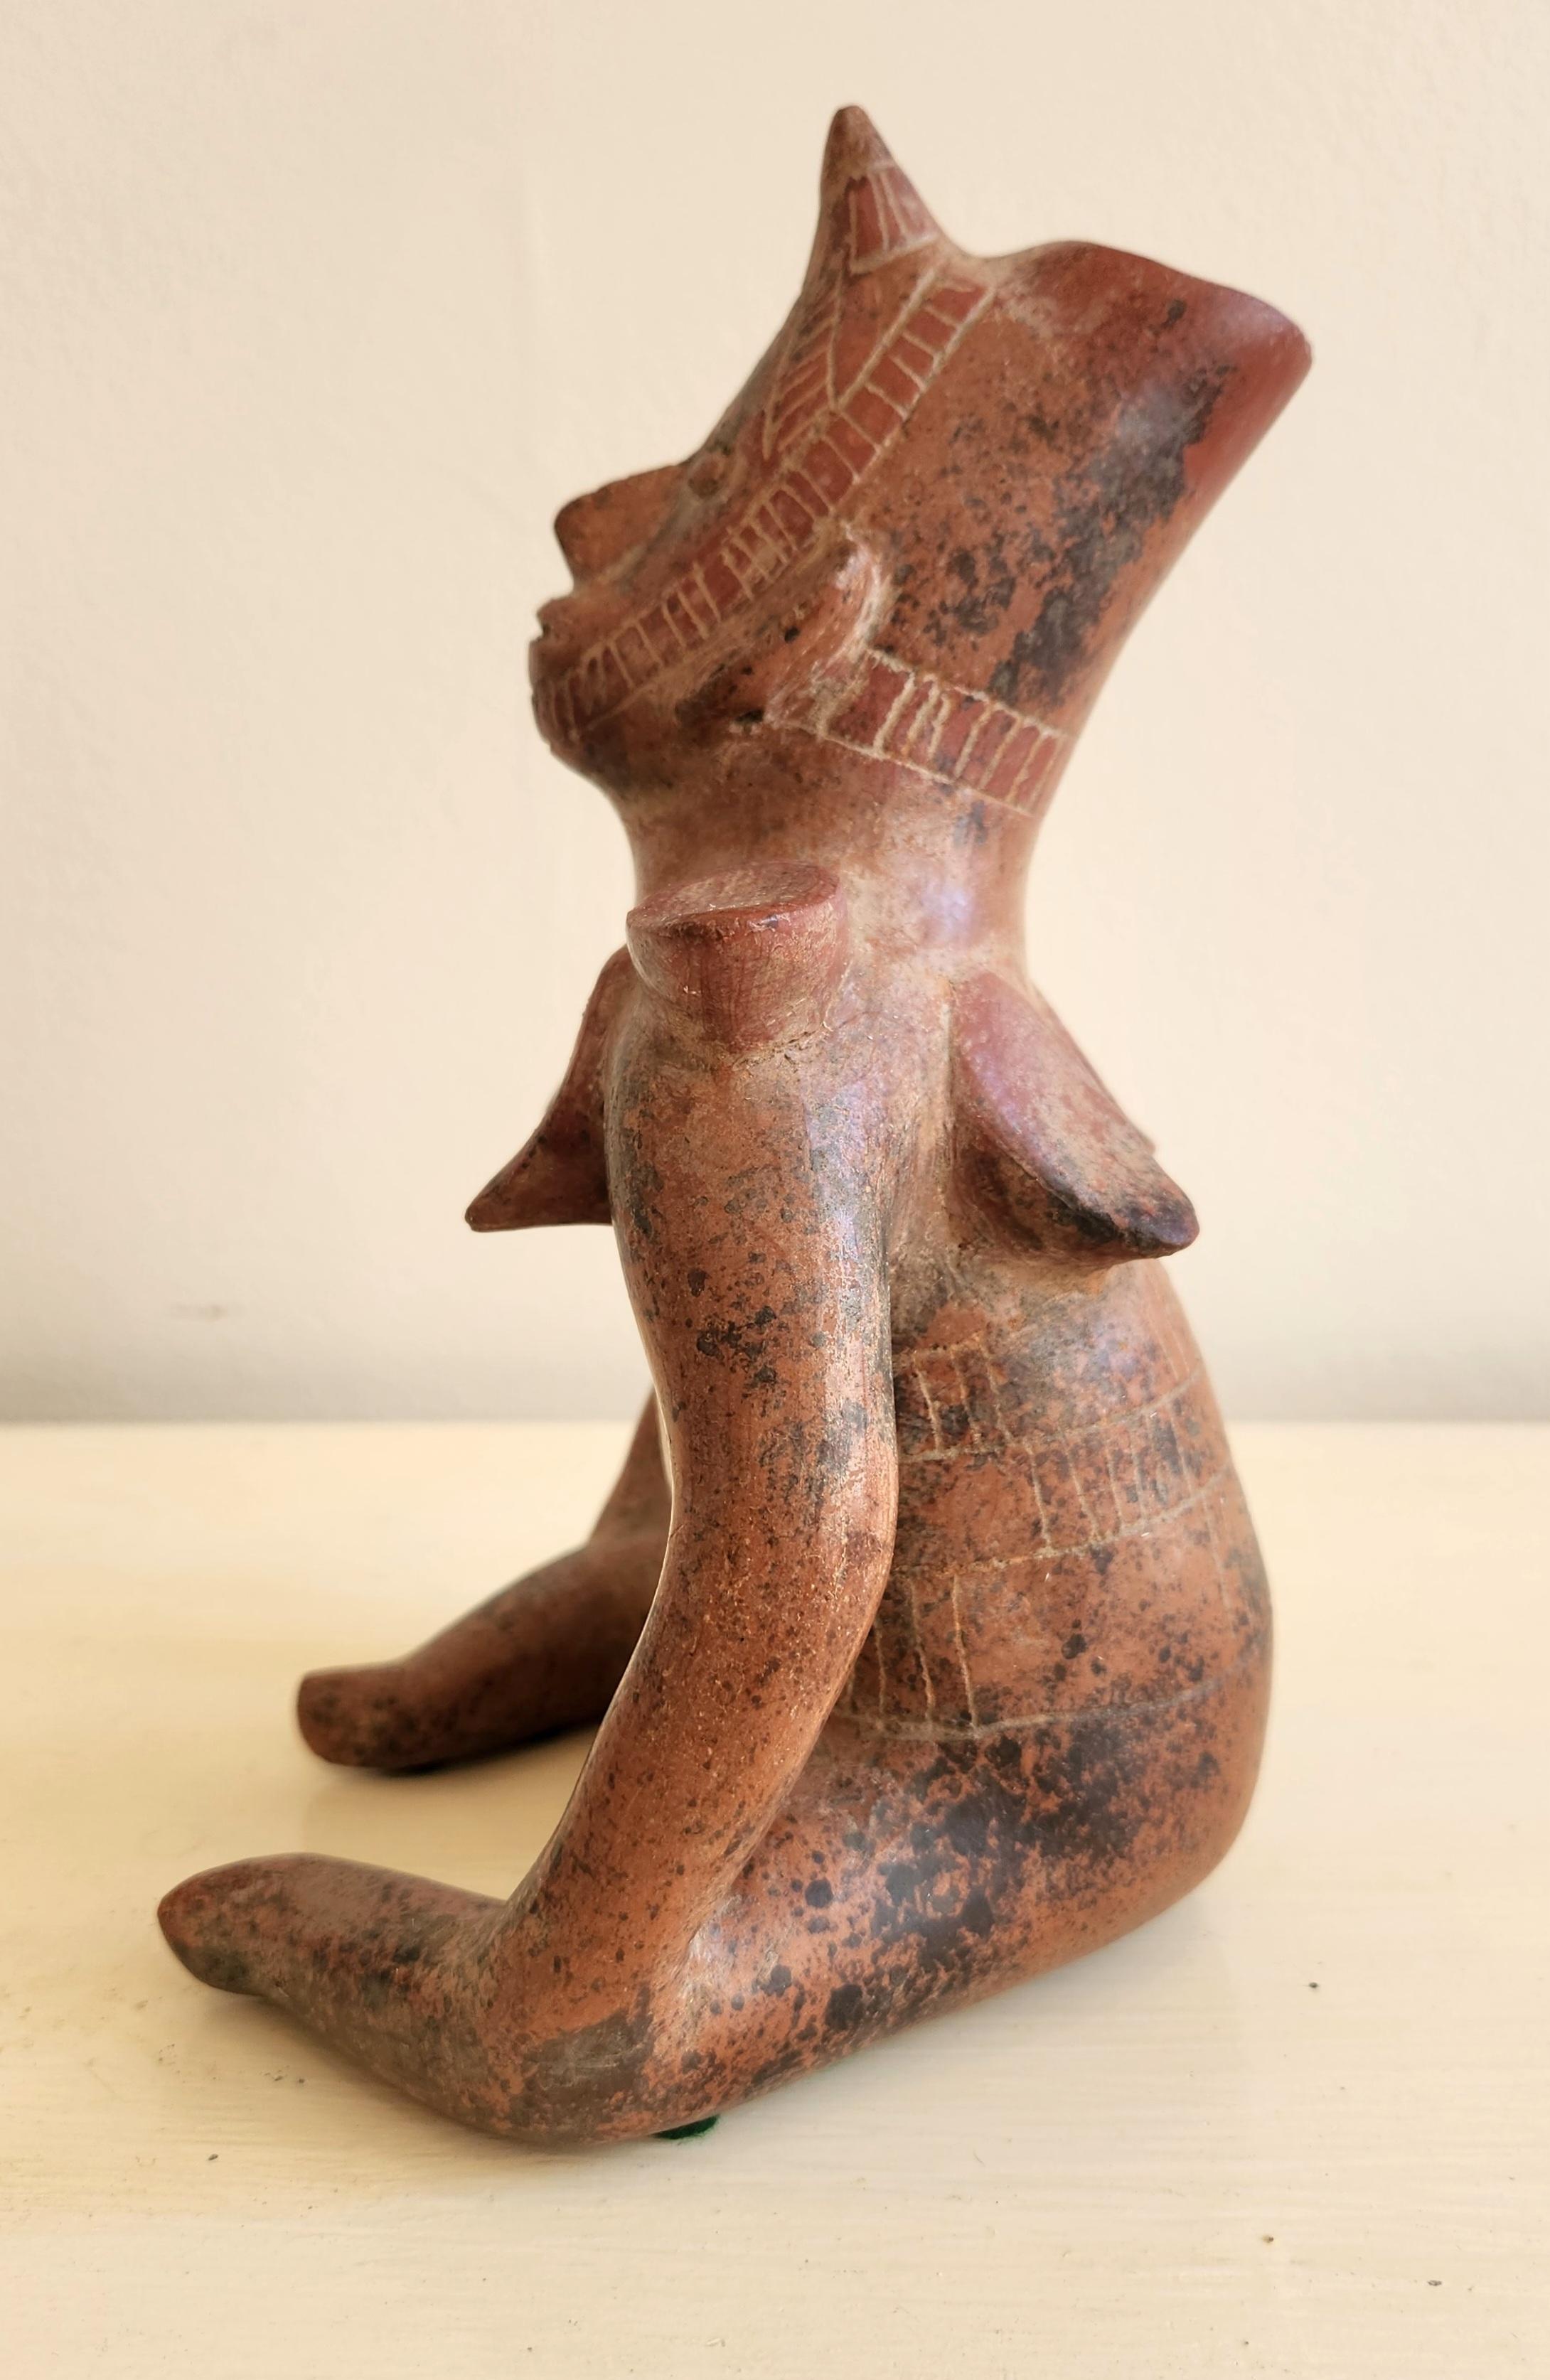 This work is made out of ceramic terracotta and is in a Pre-Columbian style. It is a reproduction of sculptures typically found in the Colima culture in western Mexico. These original sculptures usually date from around 300 BCE through 300 CE. The